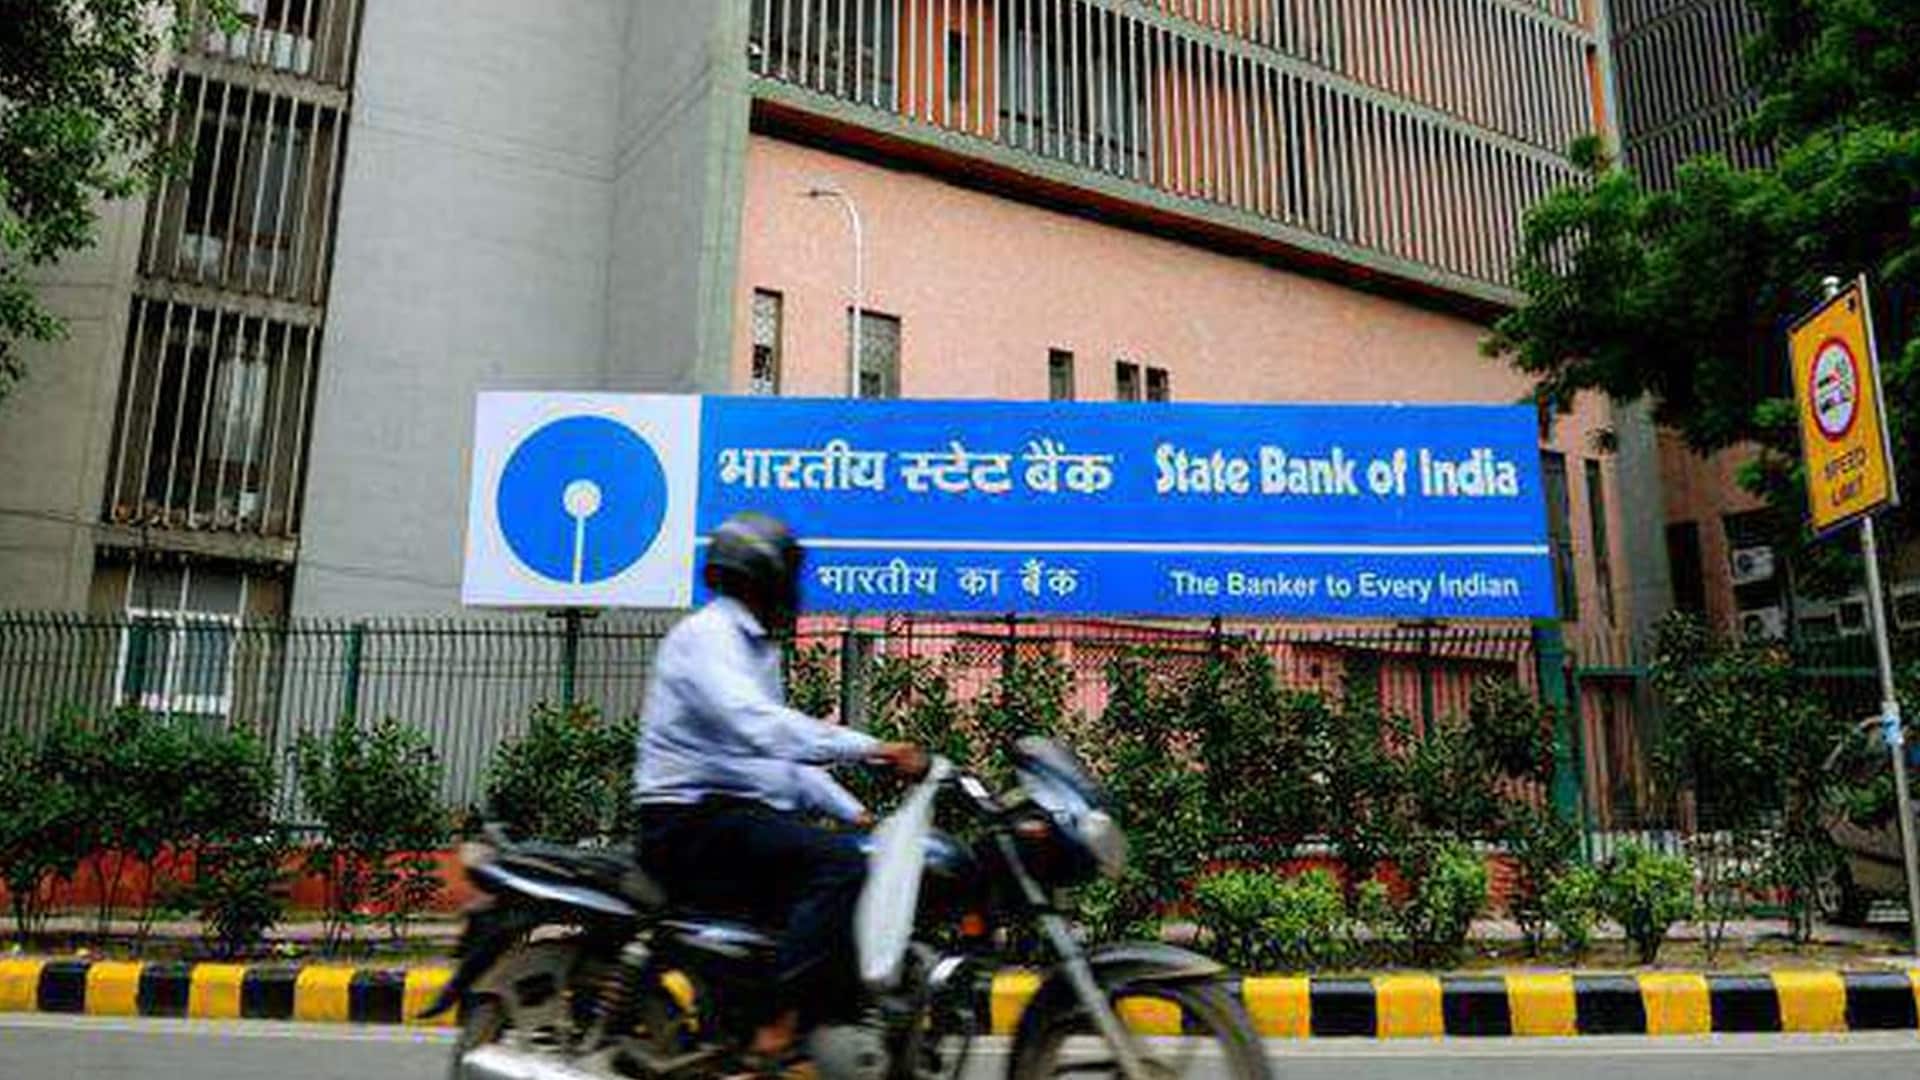 sbi stops transactions related to russian entities under sanctions